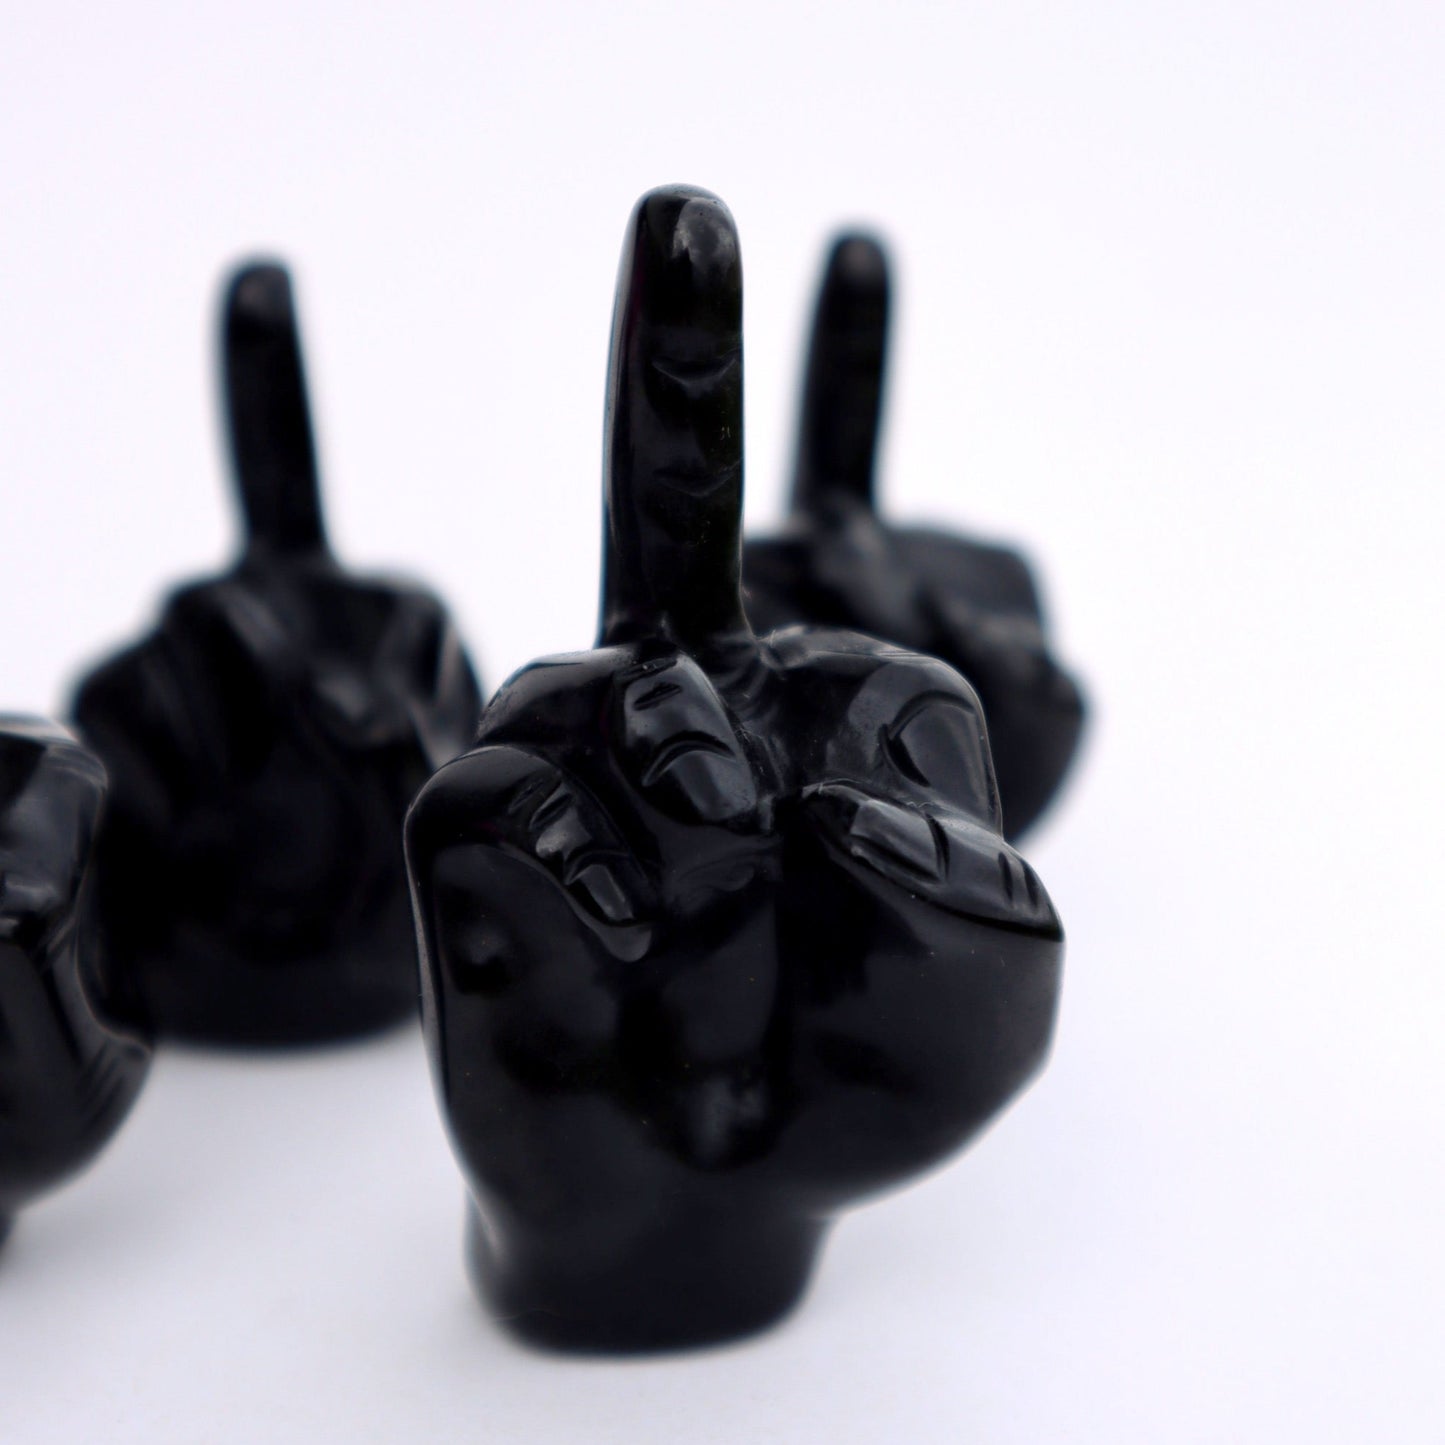 F OFF Crystal / rude finger obsidian crystal to help you chill the fuck out